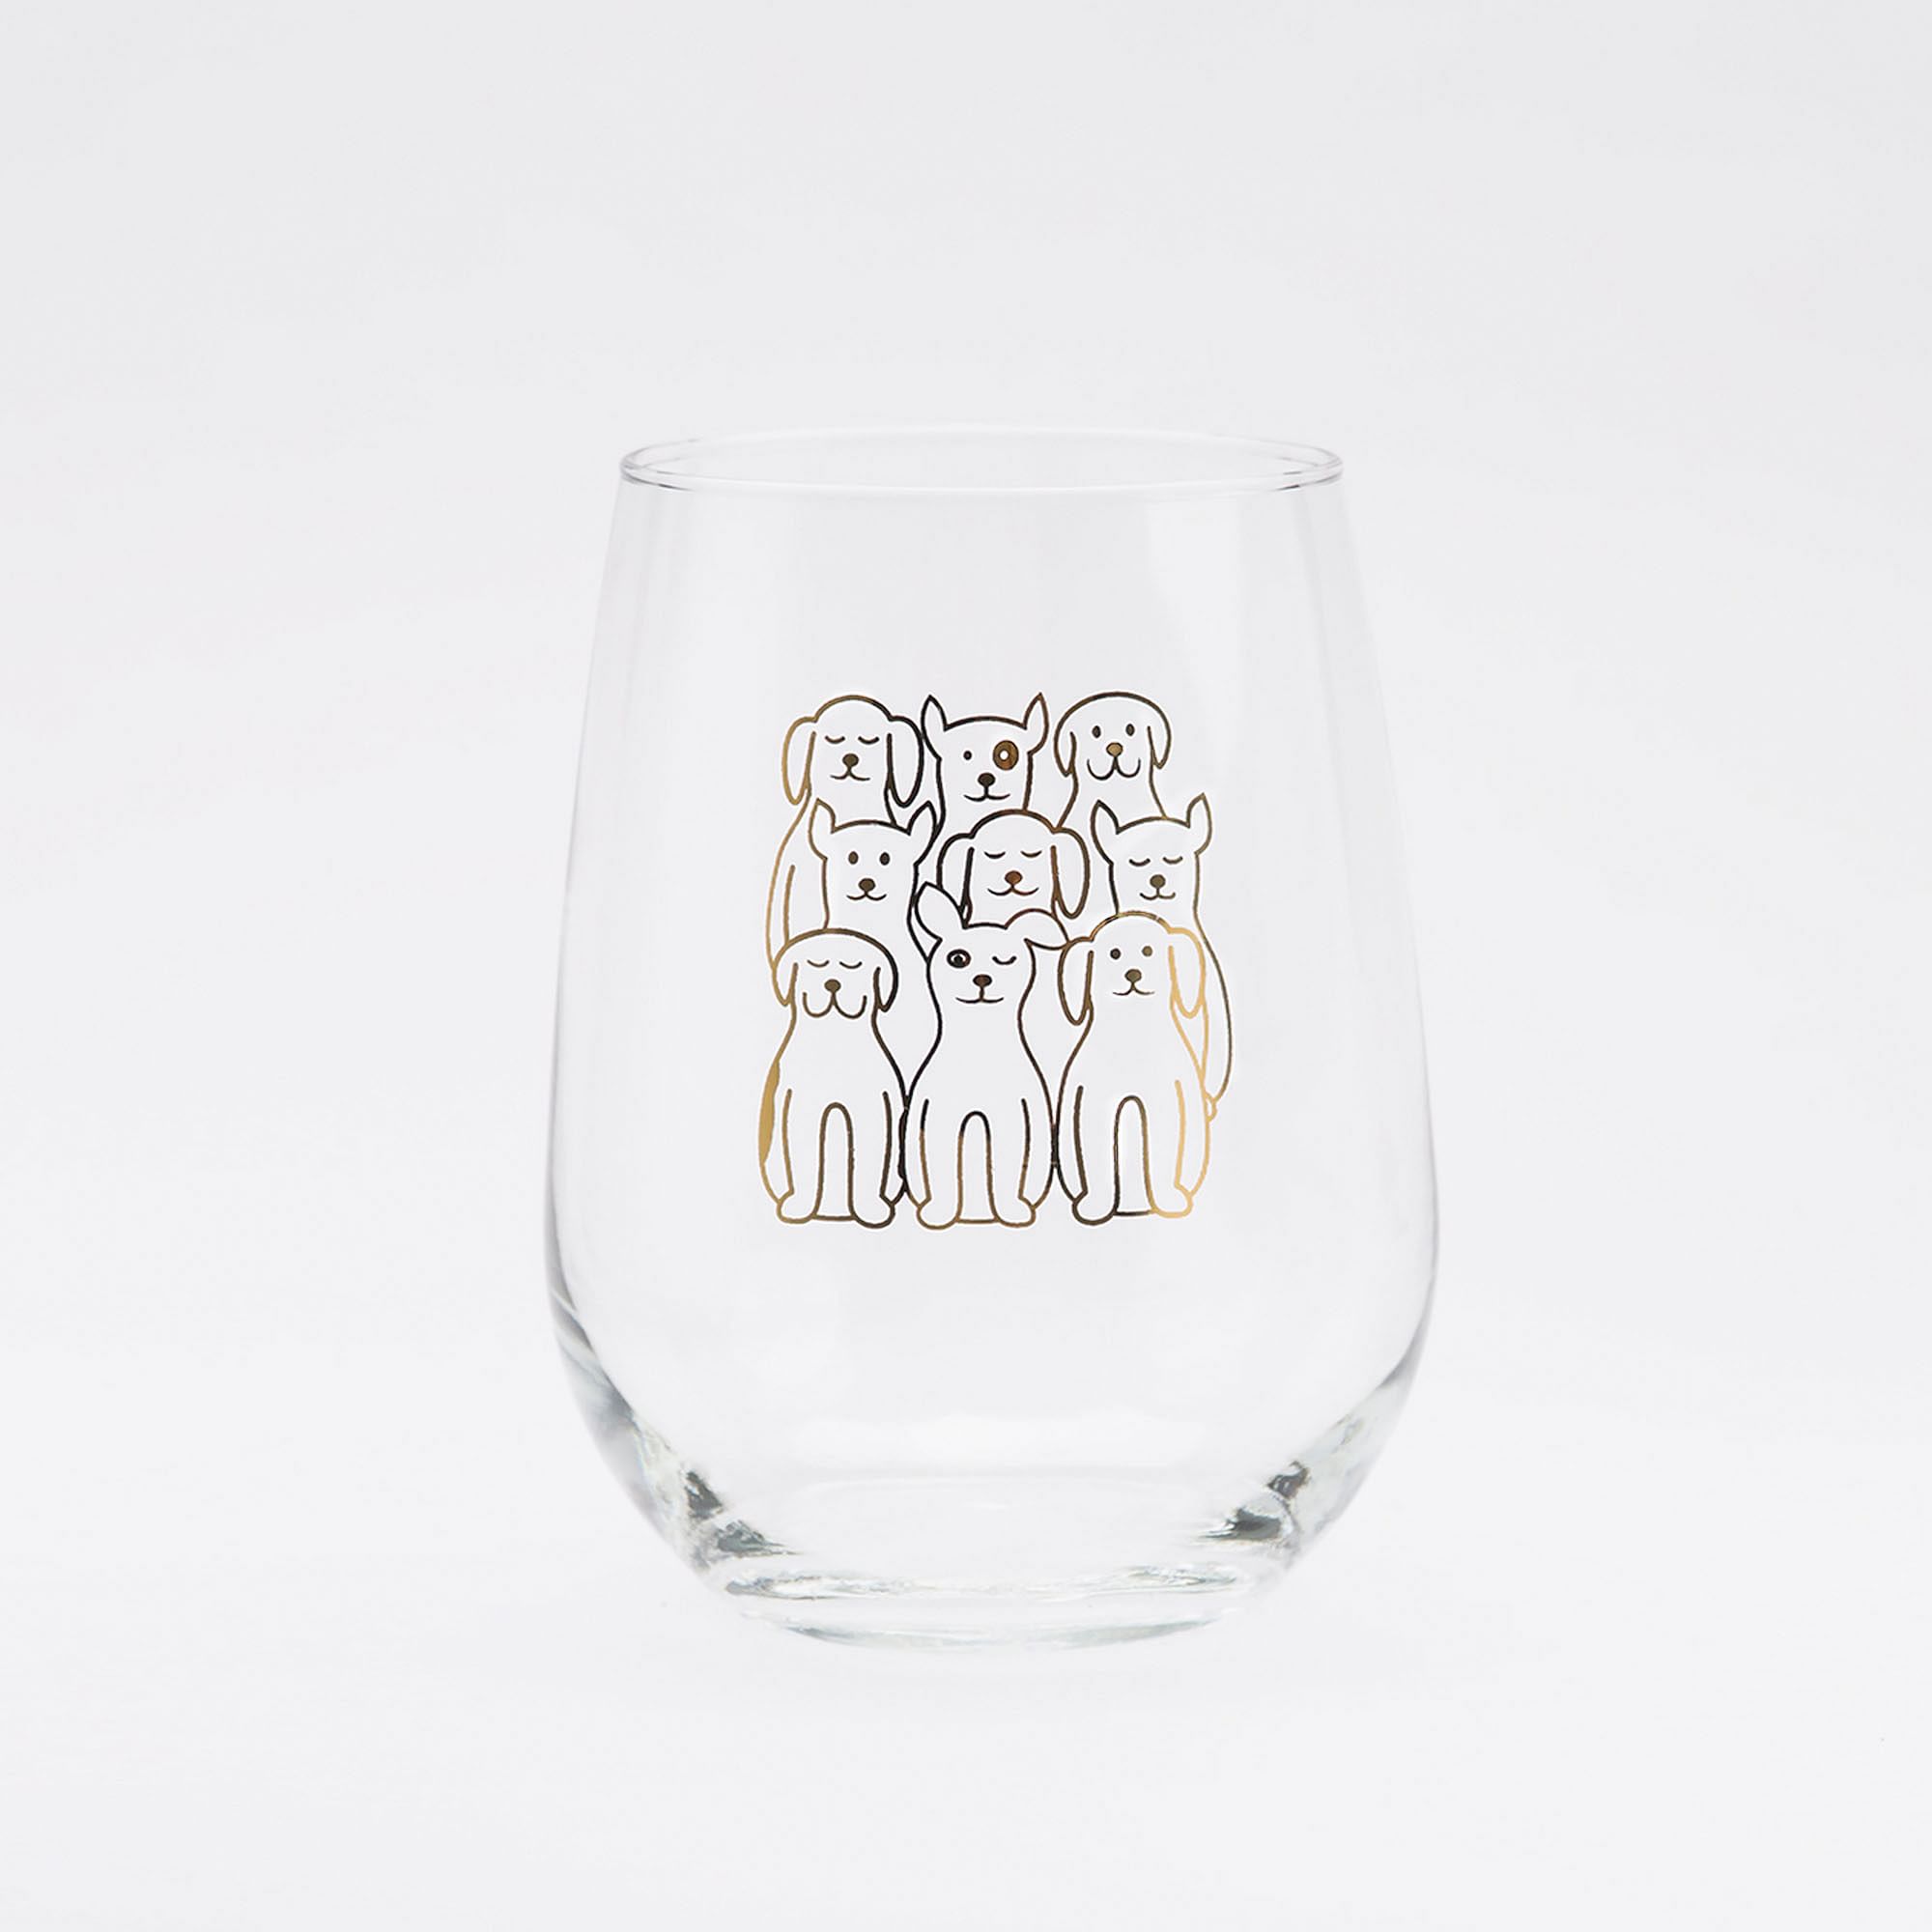 Counter Couture Stemless Wine Glass Sets | West Elm